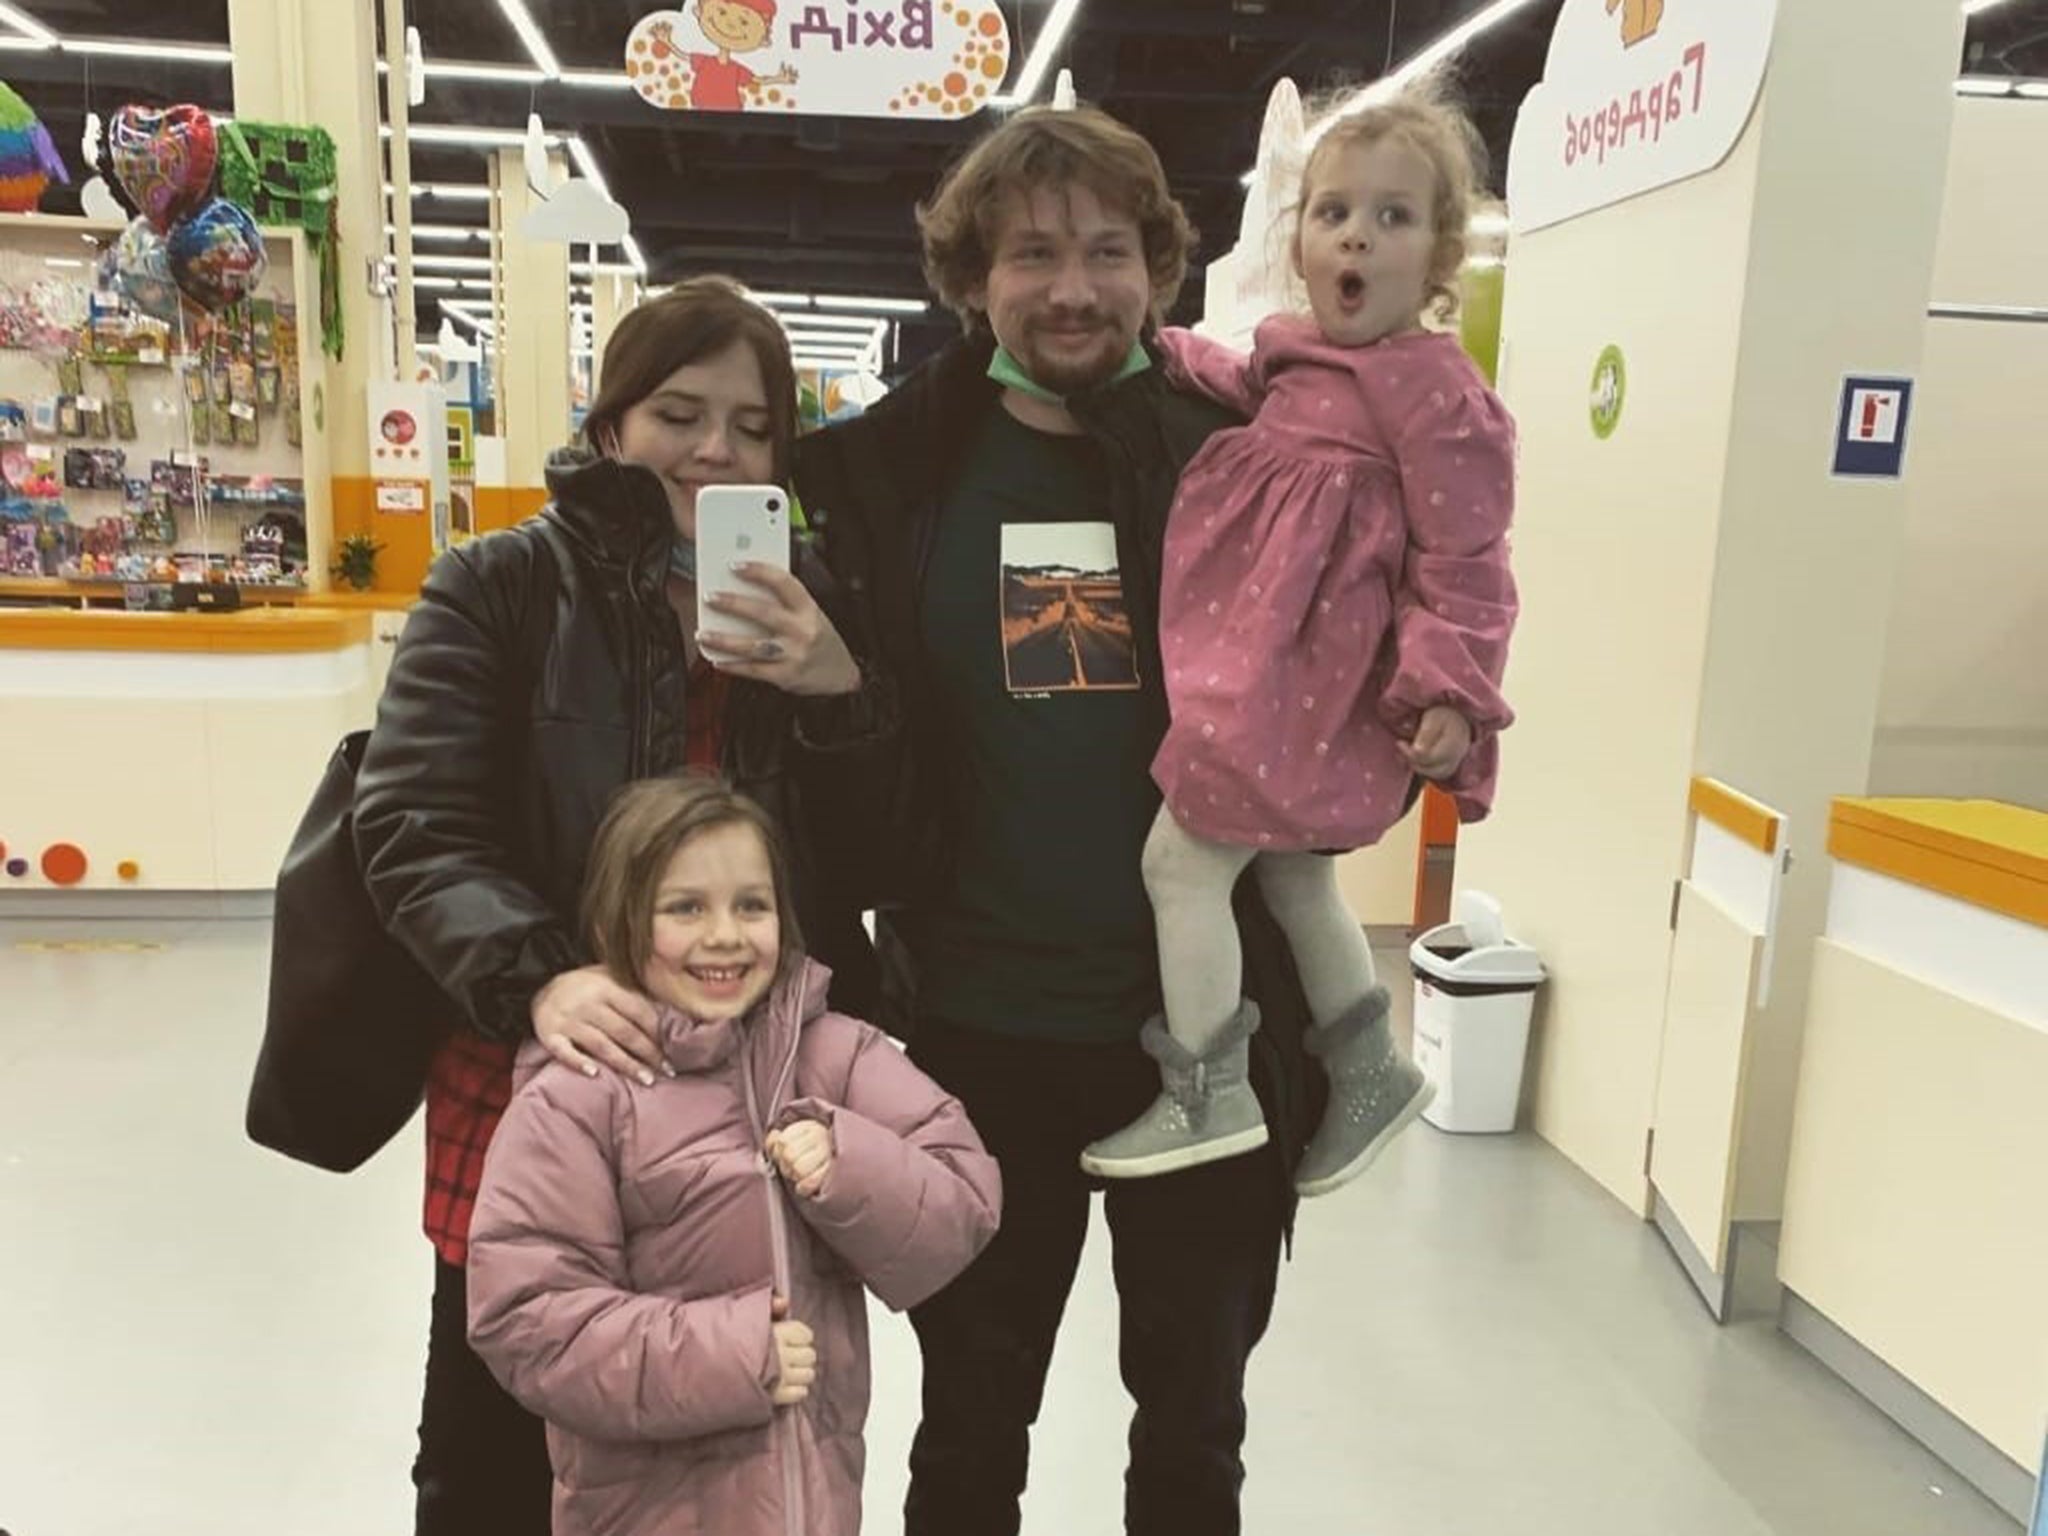 Dima and Sasha, with their children Sofia 6 and Mia 2 (being held): ‘The last picture taken of us happy and together’